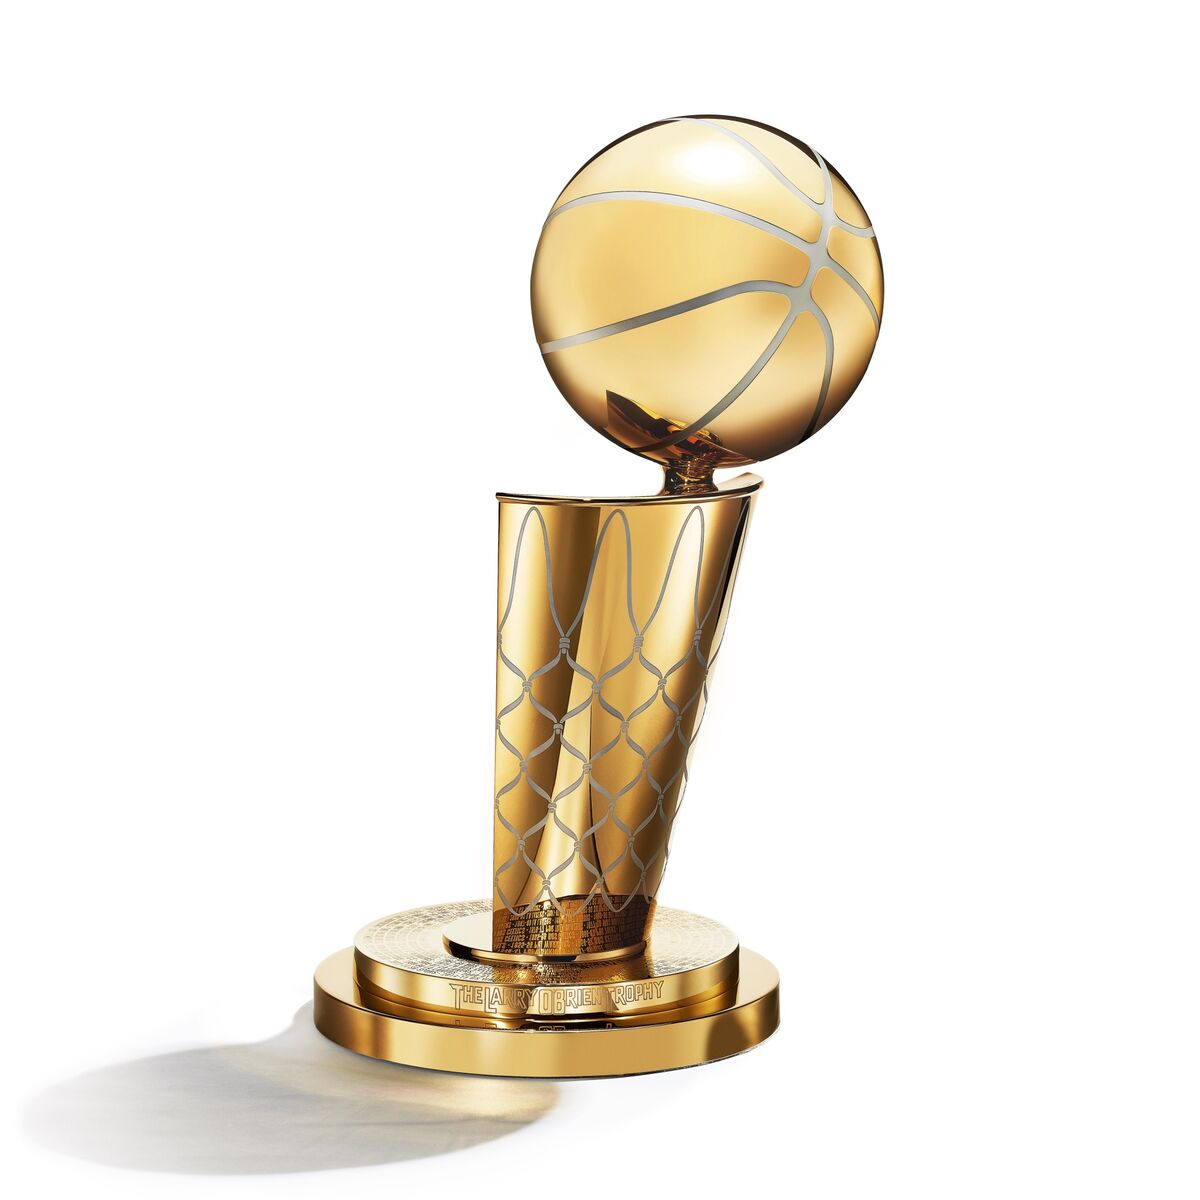 Tiffany & Co. - Congratulations to the Warriors on winning this year's NBA  Finals. This is the first team in history to take home the newly designed Larry  O'Brien Championship Trophy. #TiffanyTrophies #